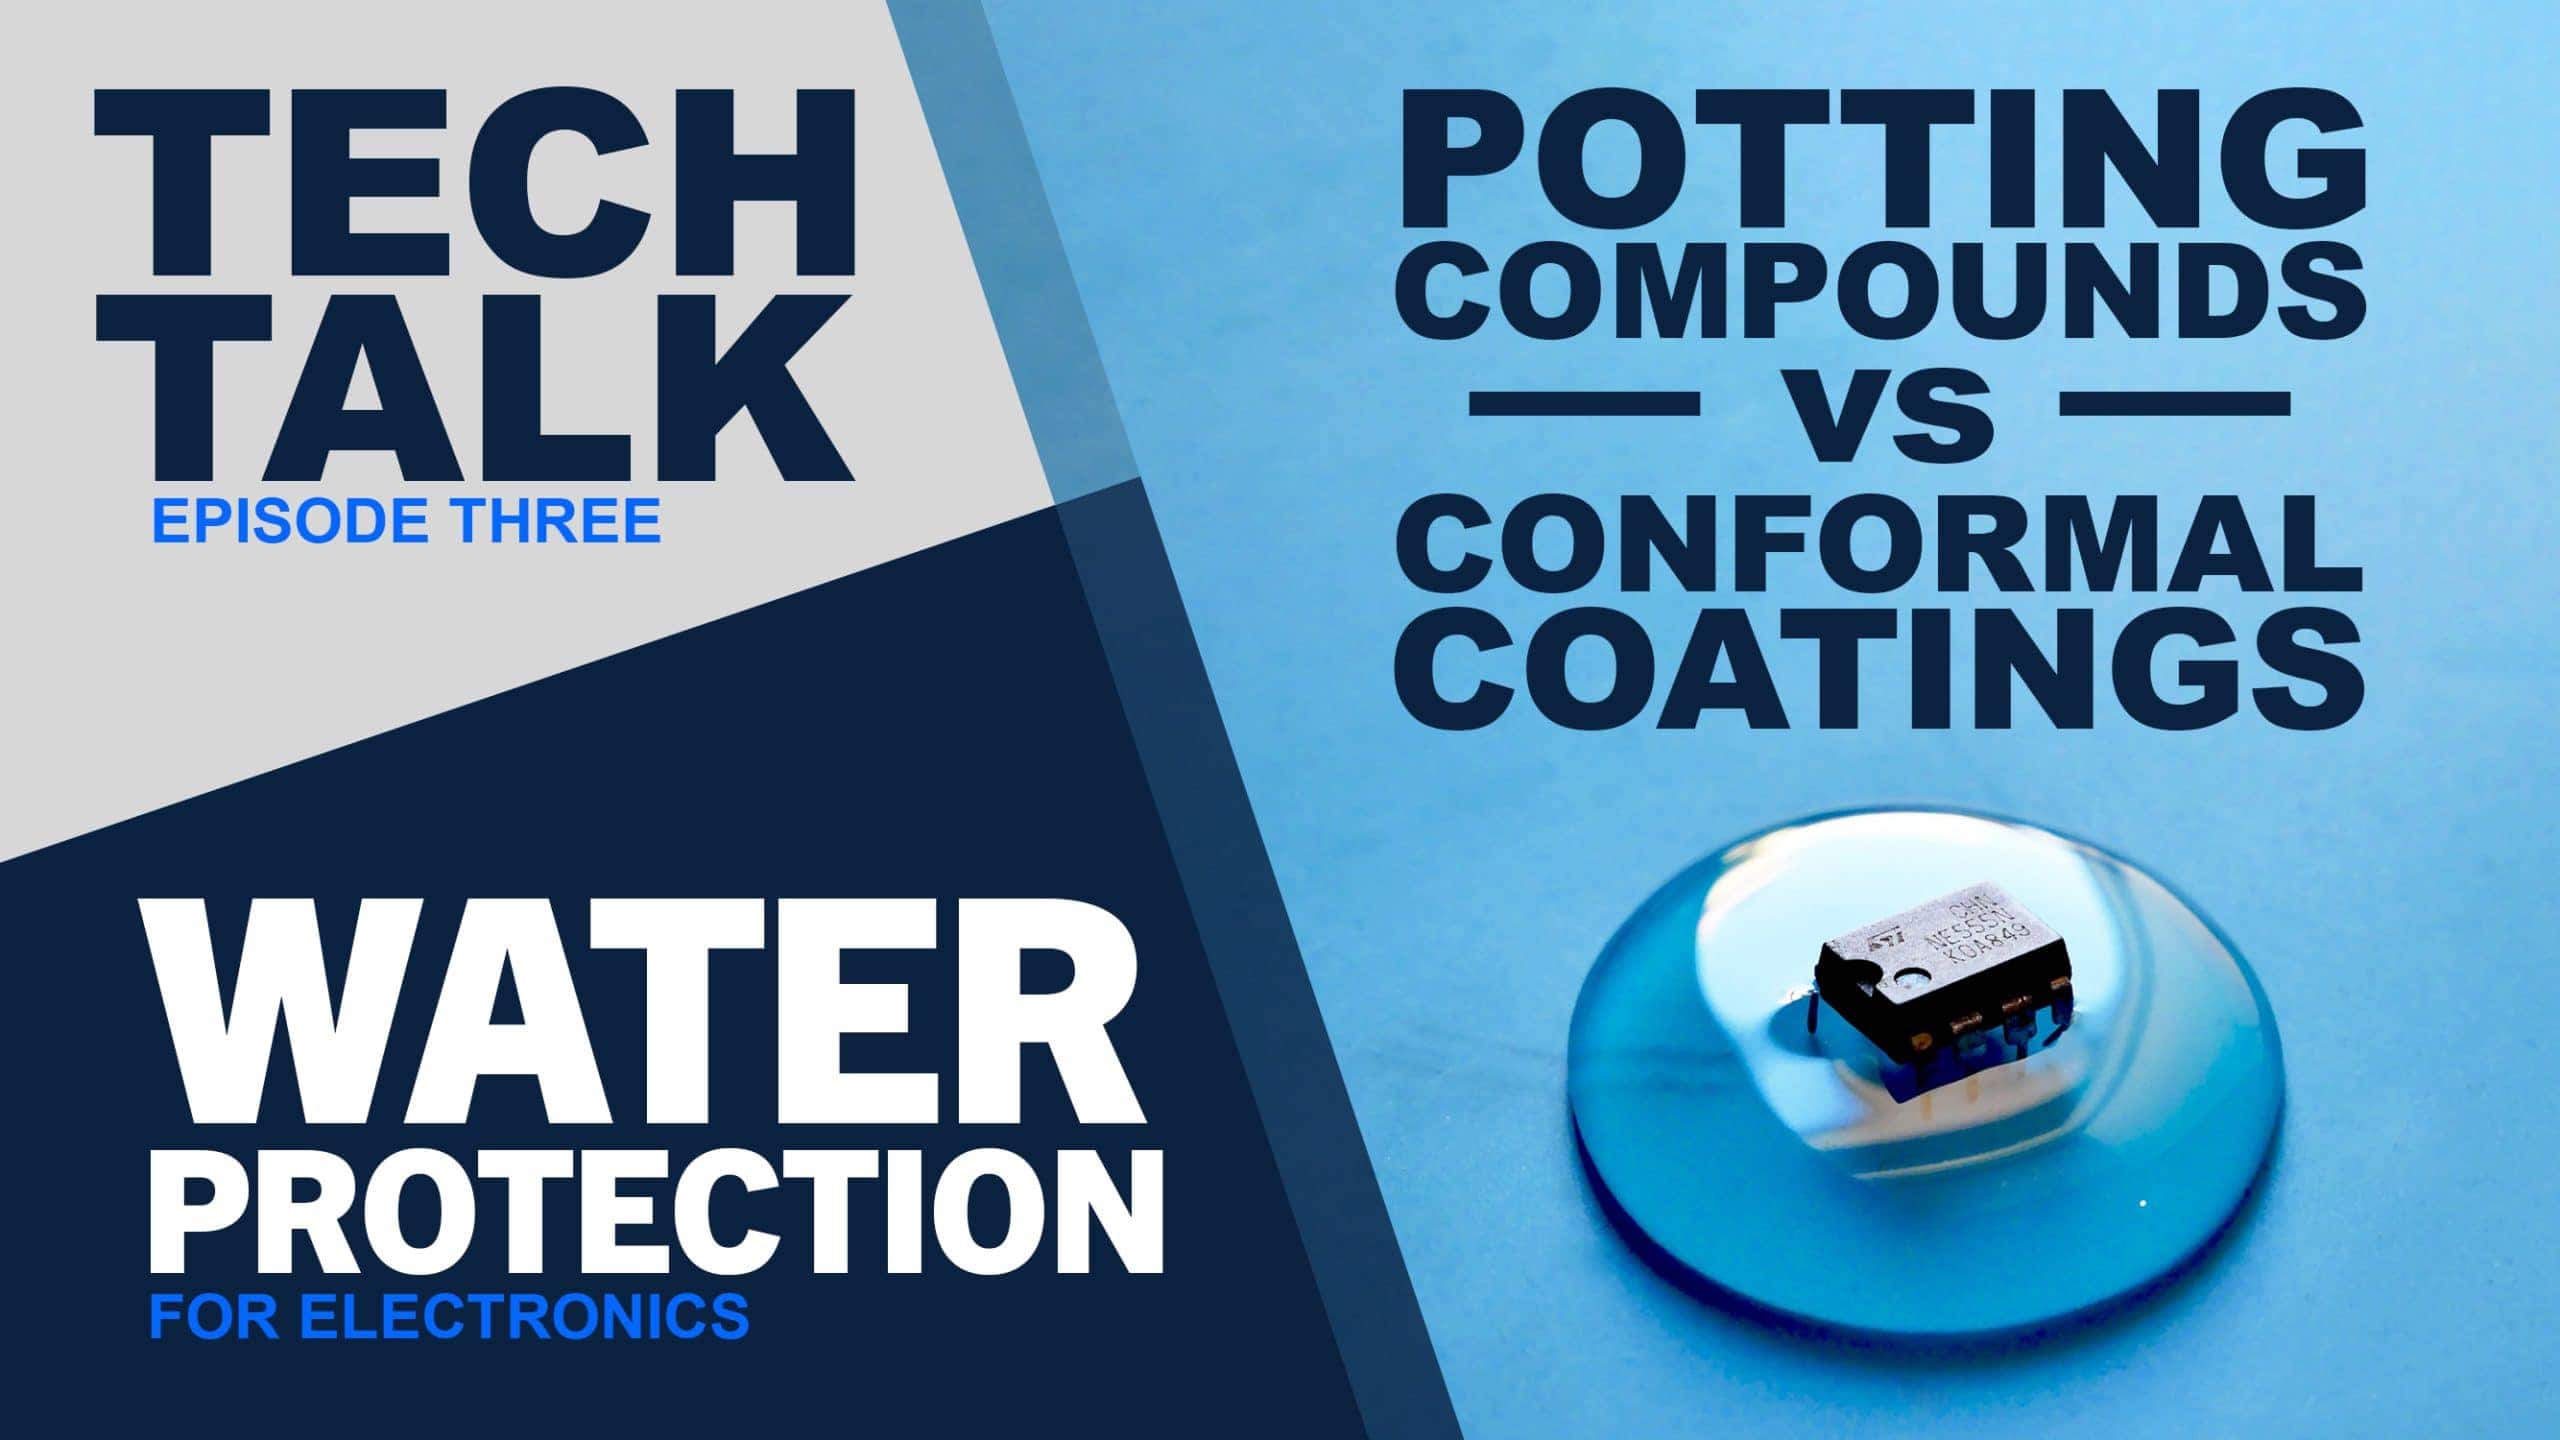 Tech Talk 3: Water Protection: Potting Compounds vs Conformal Coatings